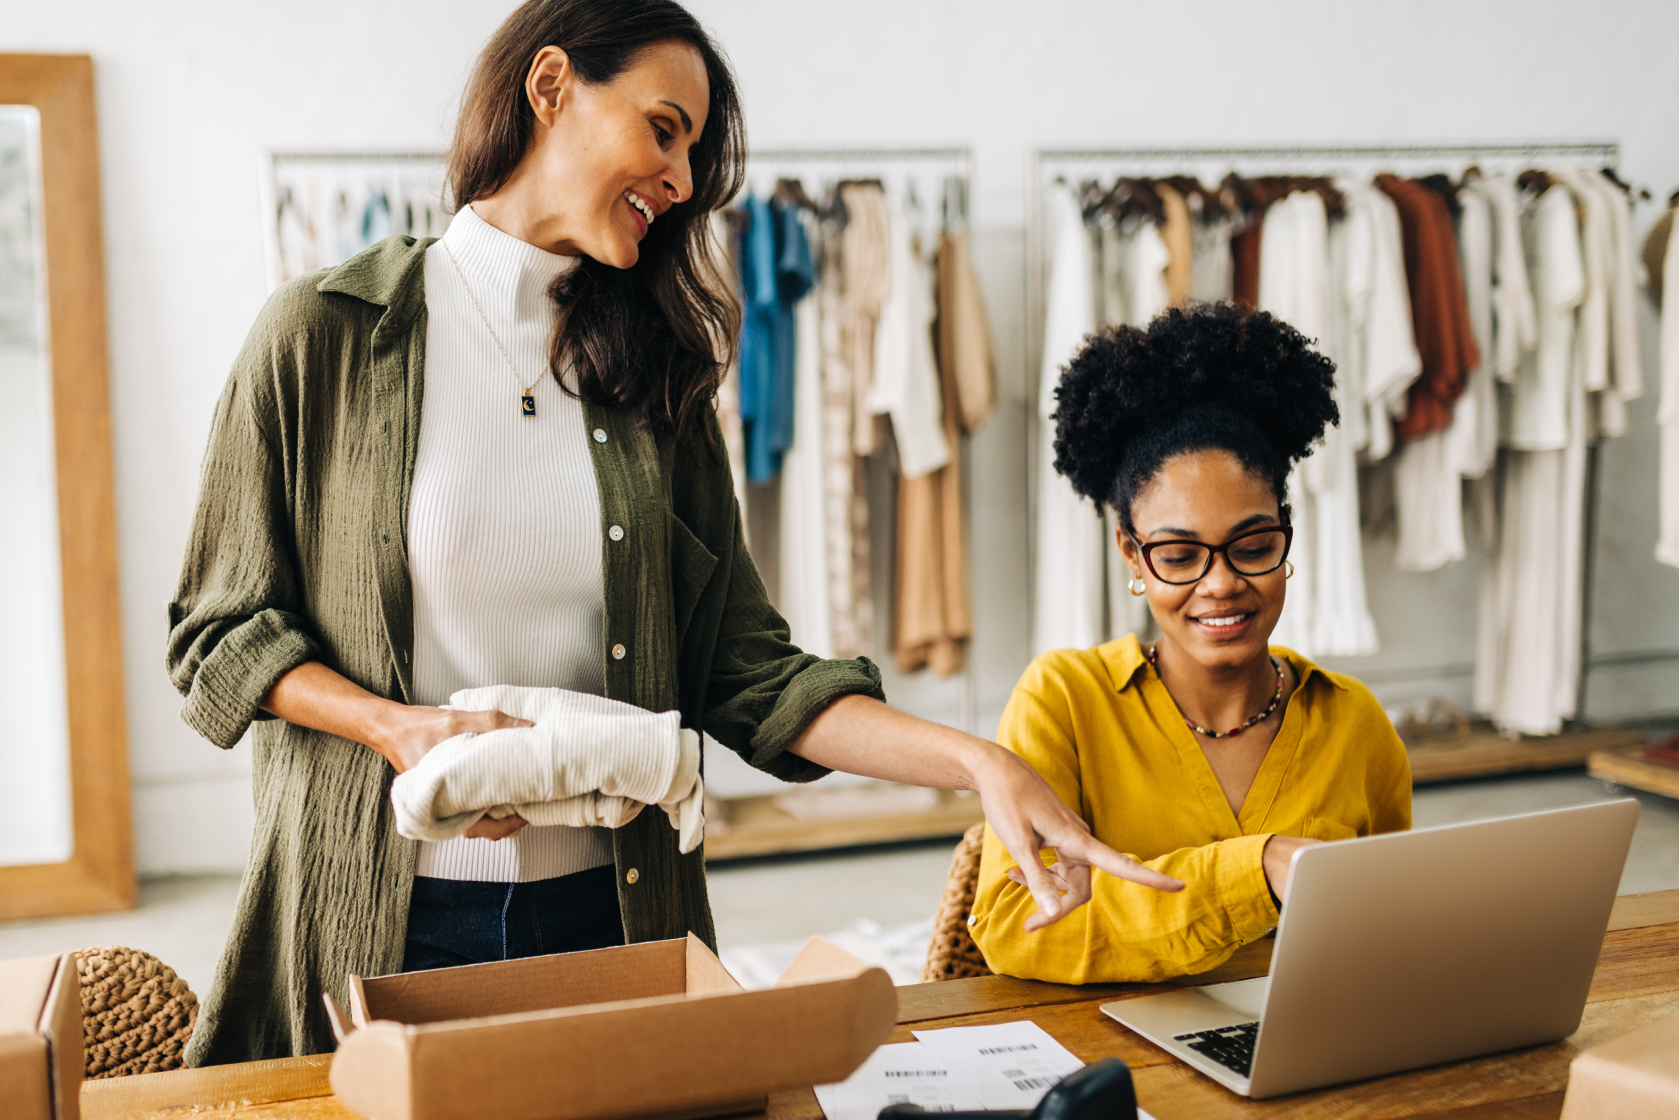 Two women business owners, one seated at a table with an open laptop and the other standing while folding clothes, discuss the advantages of their business being incorporated.